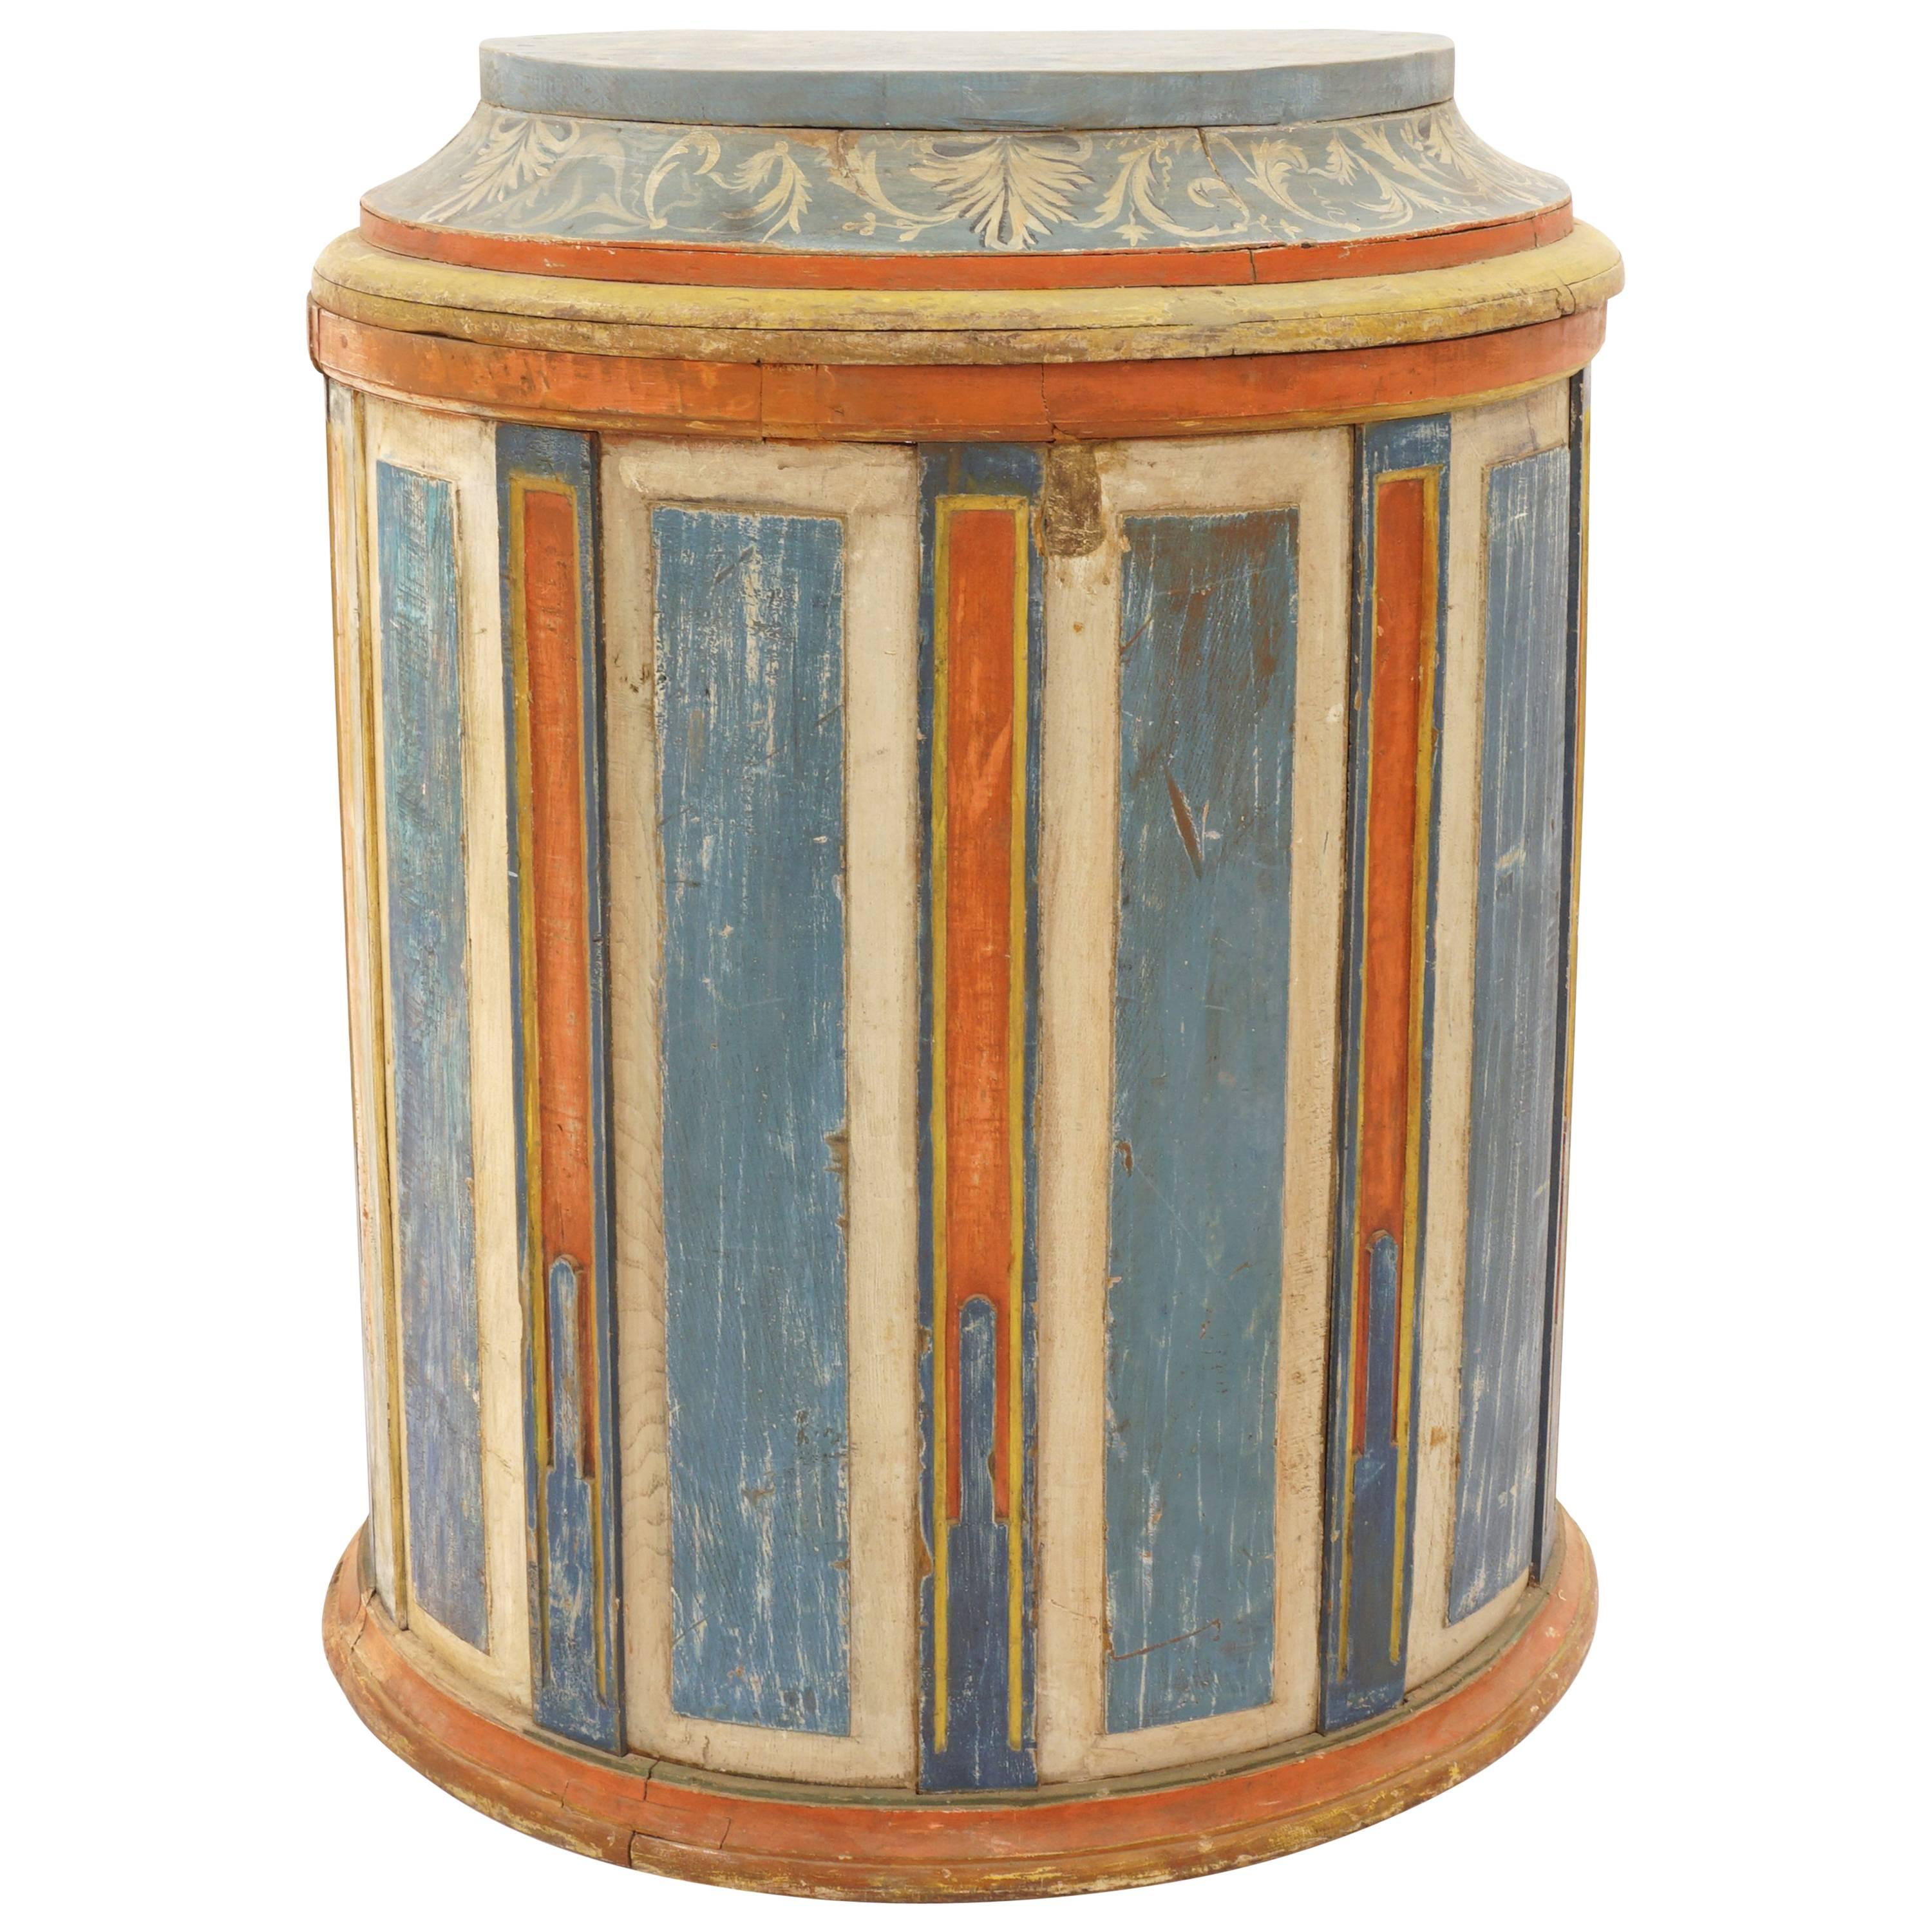 Early 19th Century Late Gustavian Pedestal For Sale